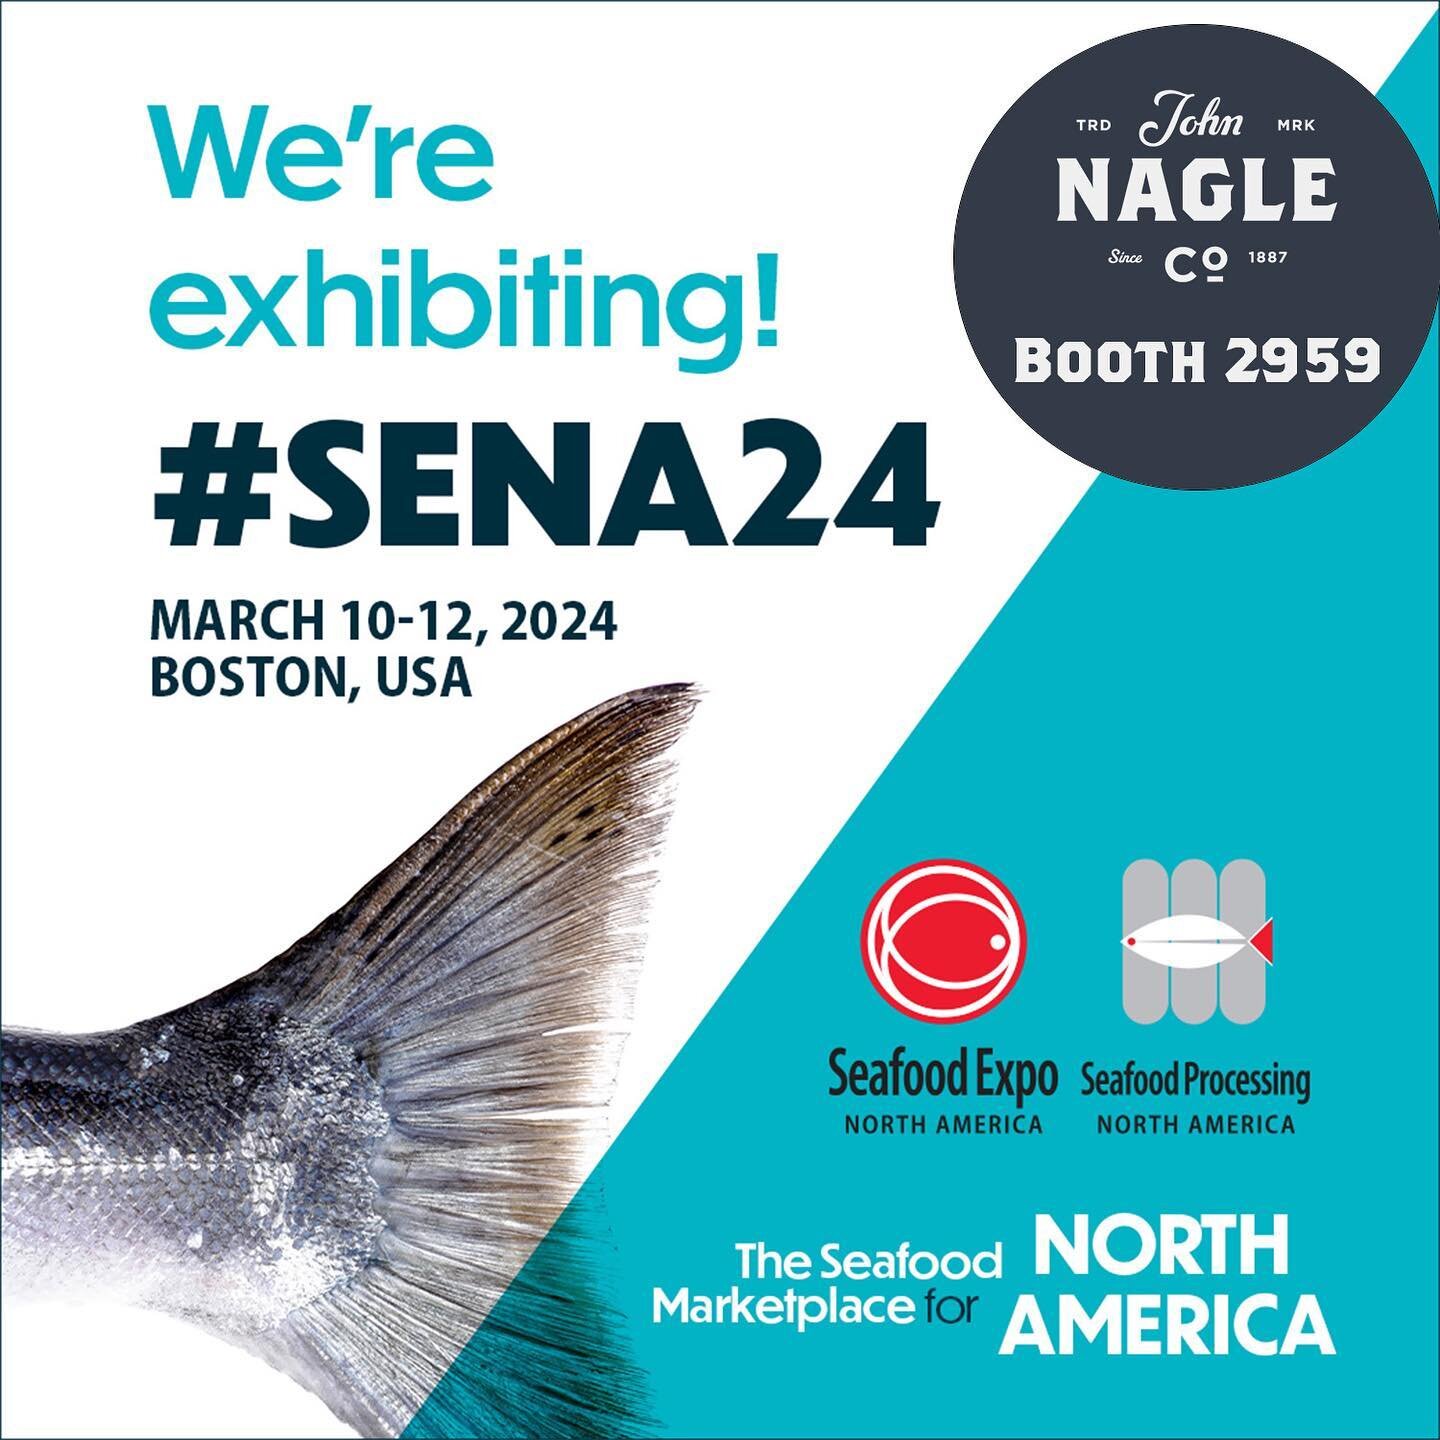 Breaking News ! John Nagle Co is excited to exhibit at the 2024 Seafood Expo North America (#SENA) this weekend. We are looking forward to meet with our customers, vendors, and future partners. Please stop by our booth #2959  we look forward to seein